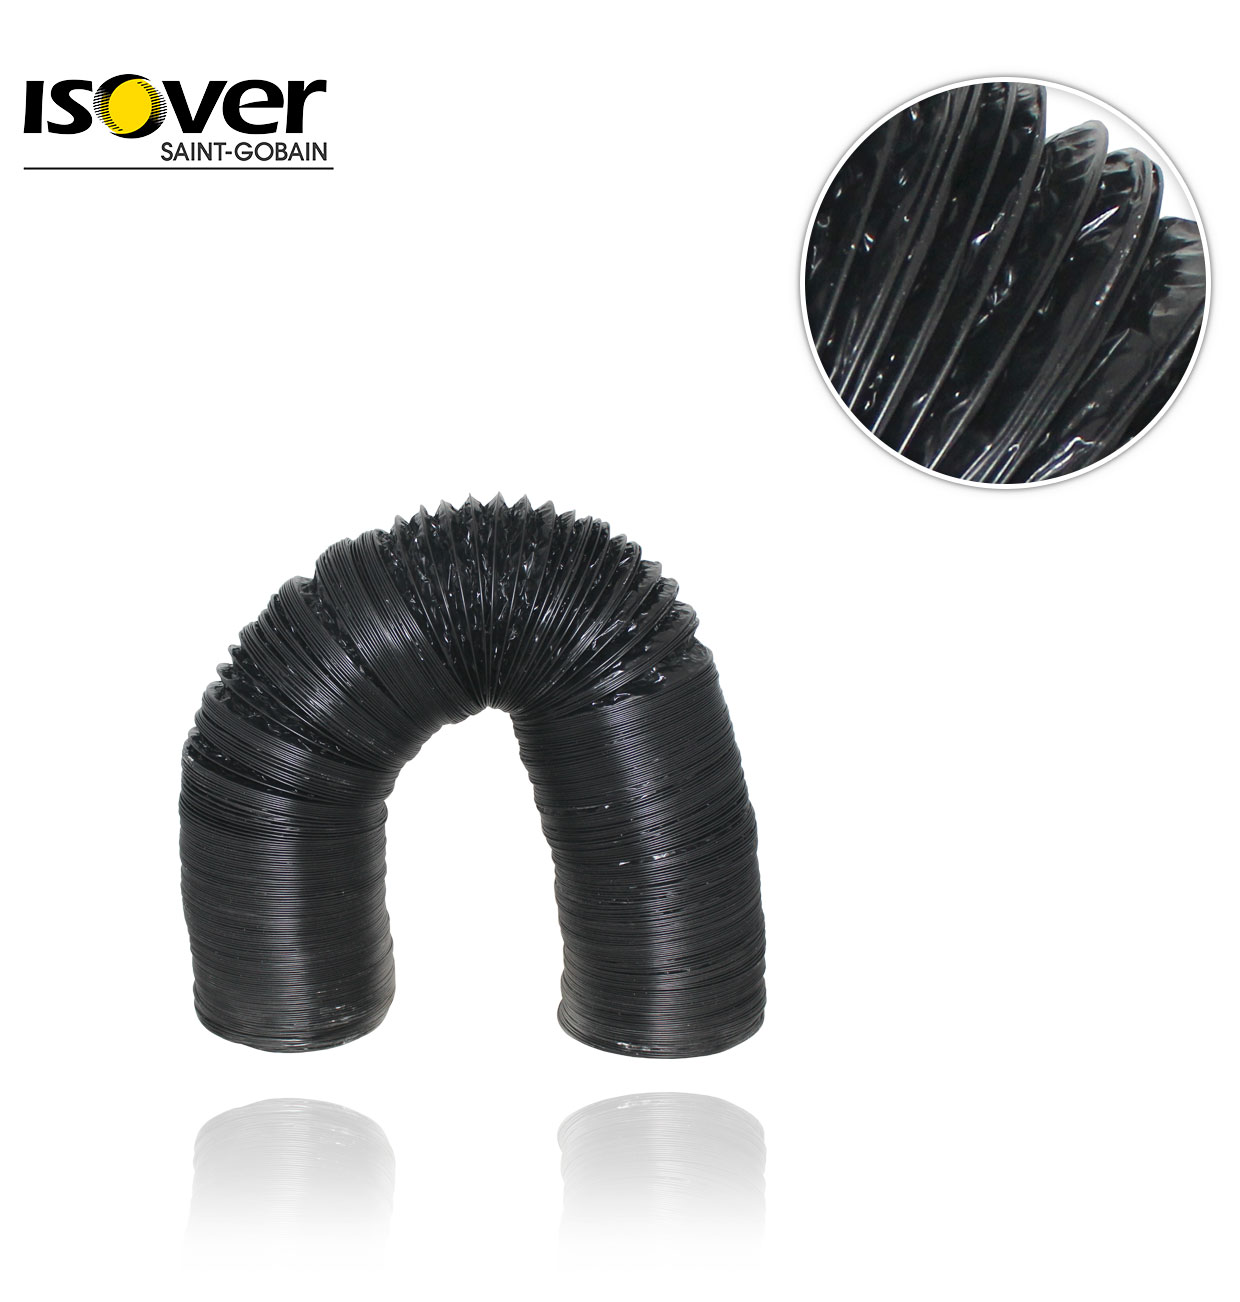 82ml FLEXIVER FLEXIBLE TUBE WITH BLACK PROTECTOR